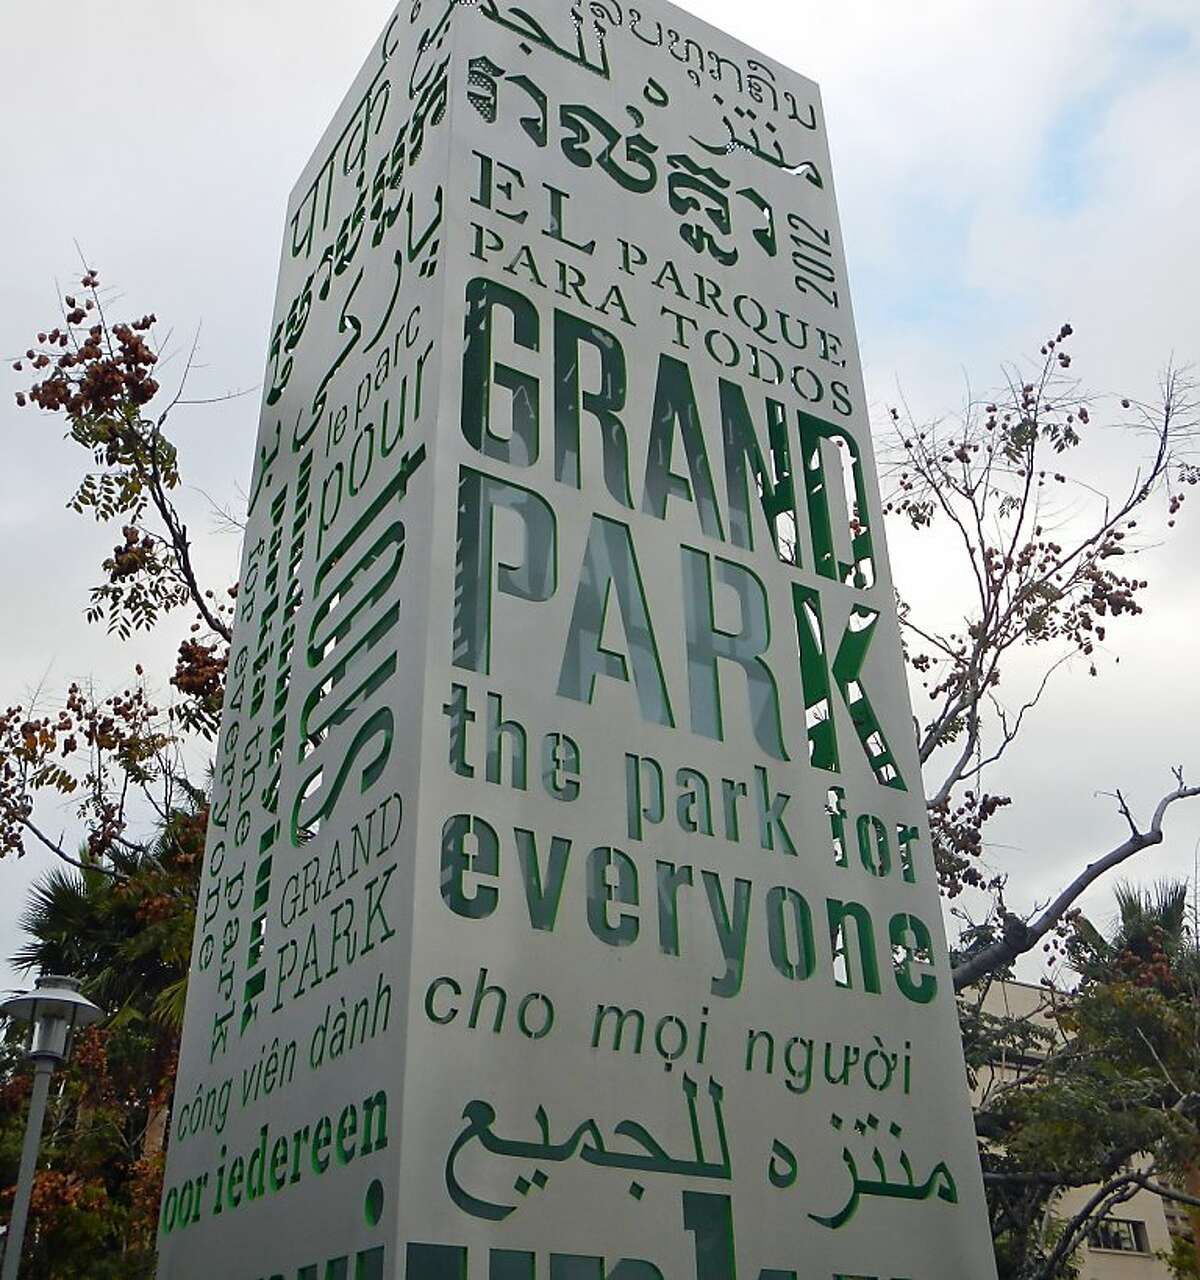 Grand Park is a new green space for music, food, and fun in downtown LA.